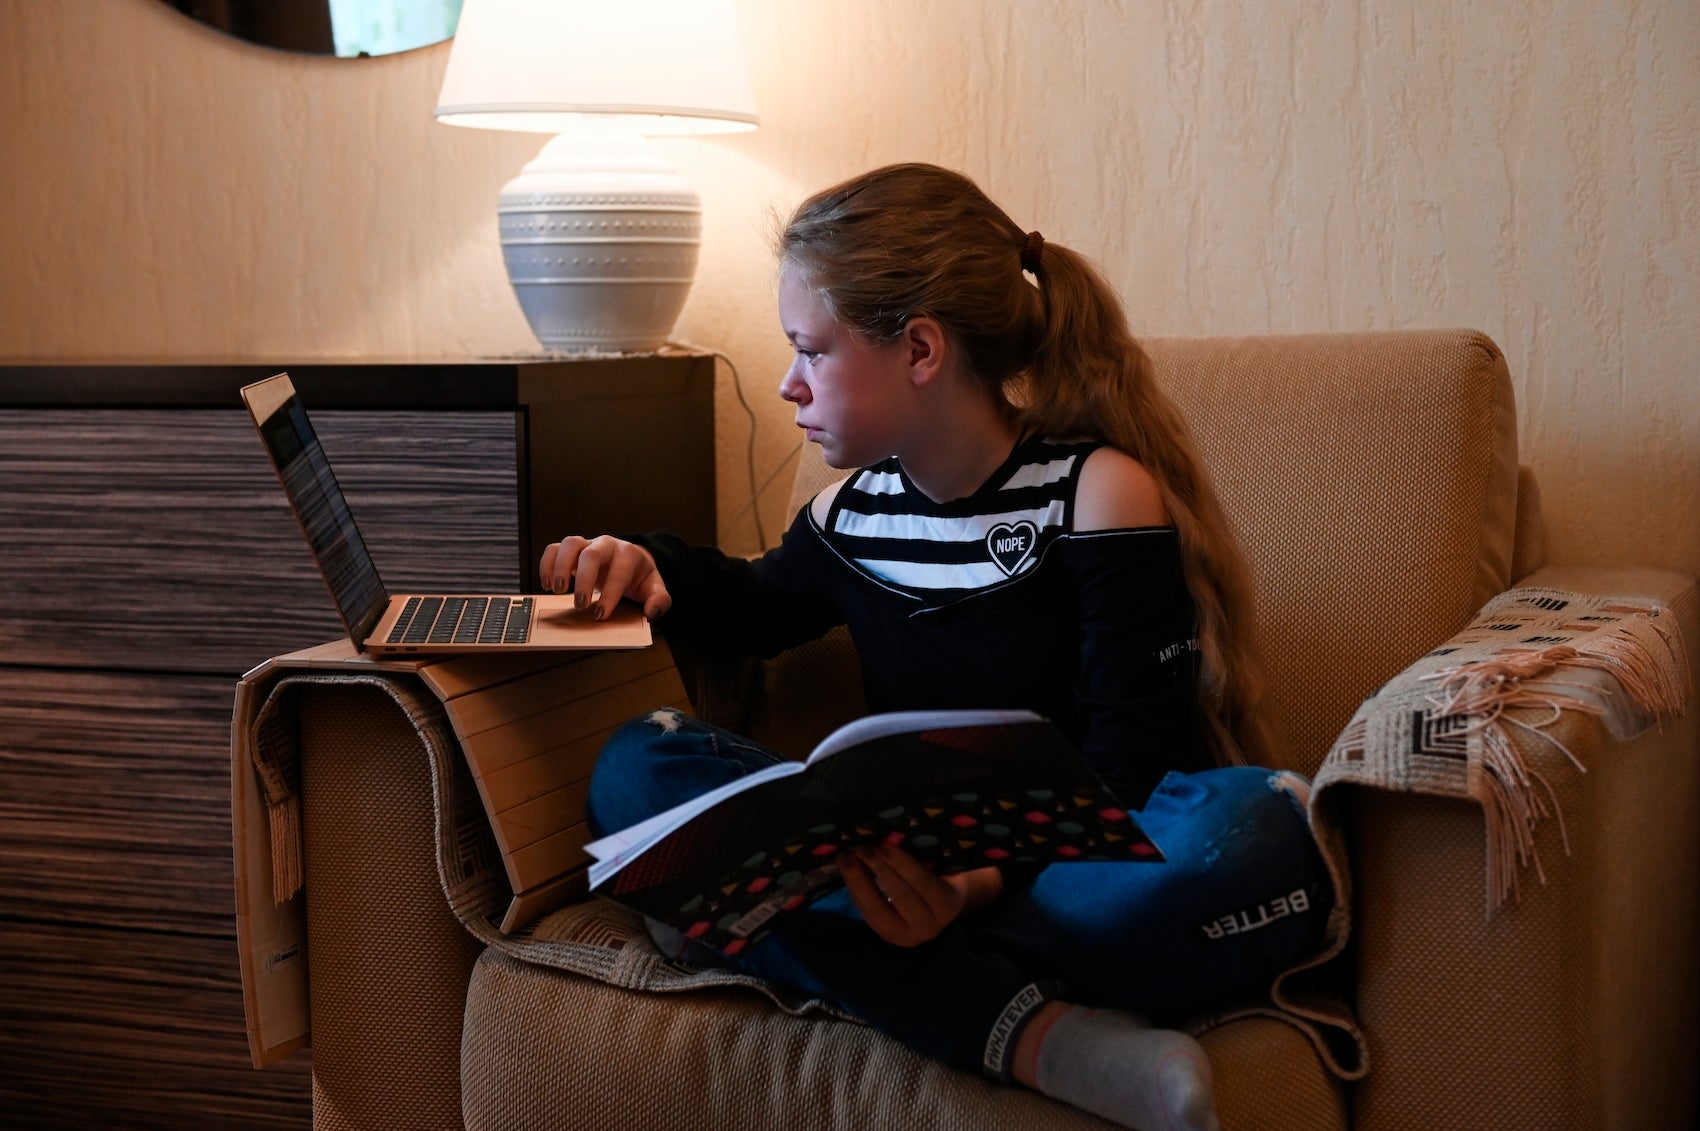 A child studies online from home in Moscow, Russia, amidst school closures during the Covid-19 pandemic.